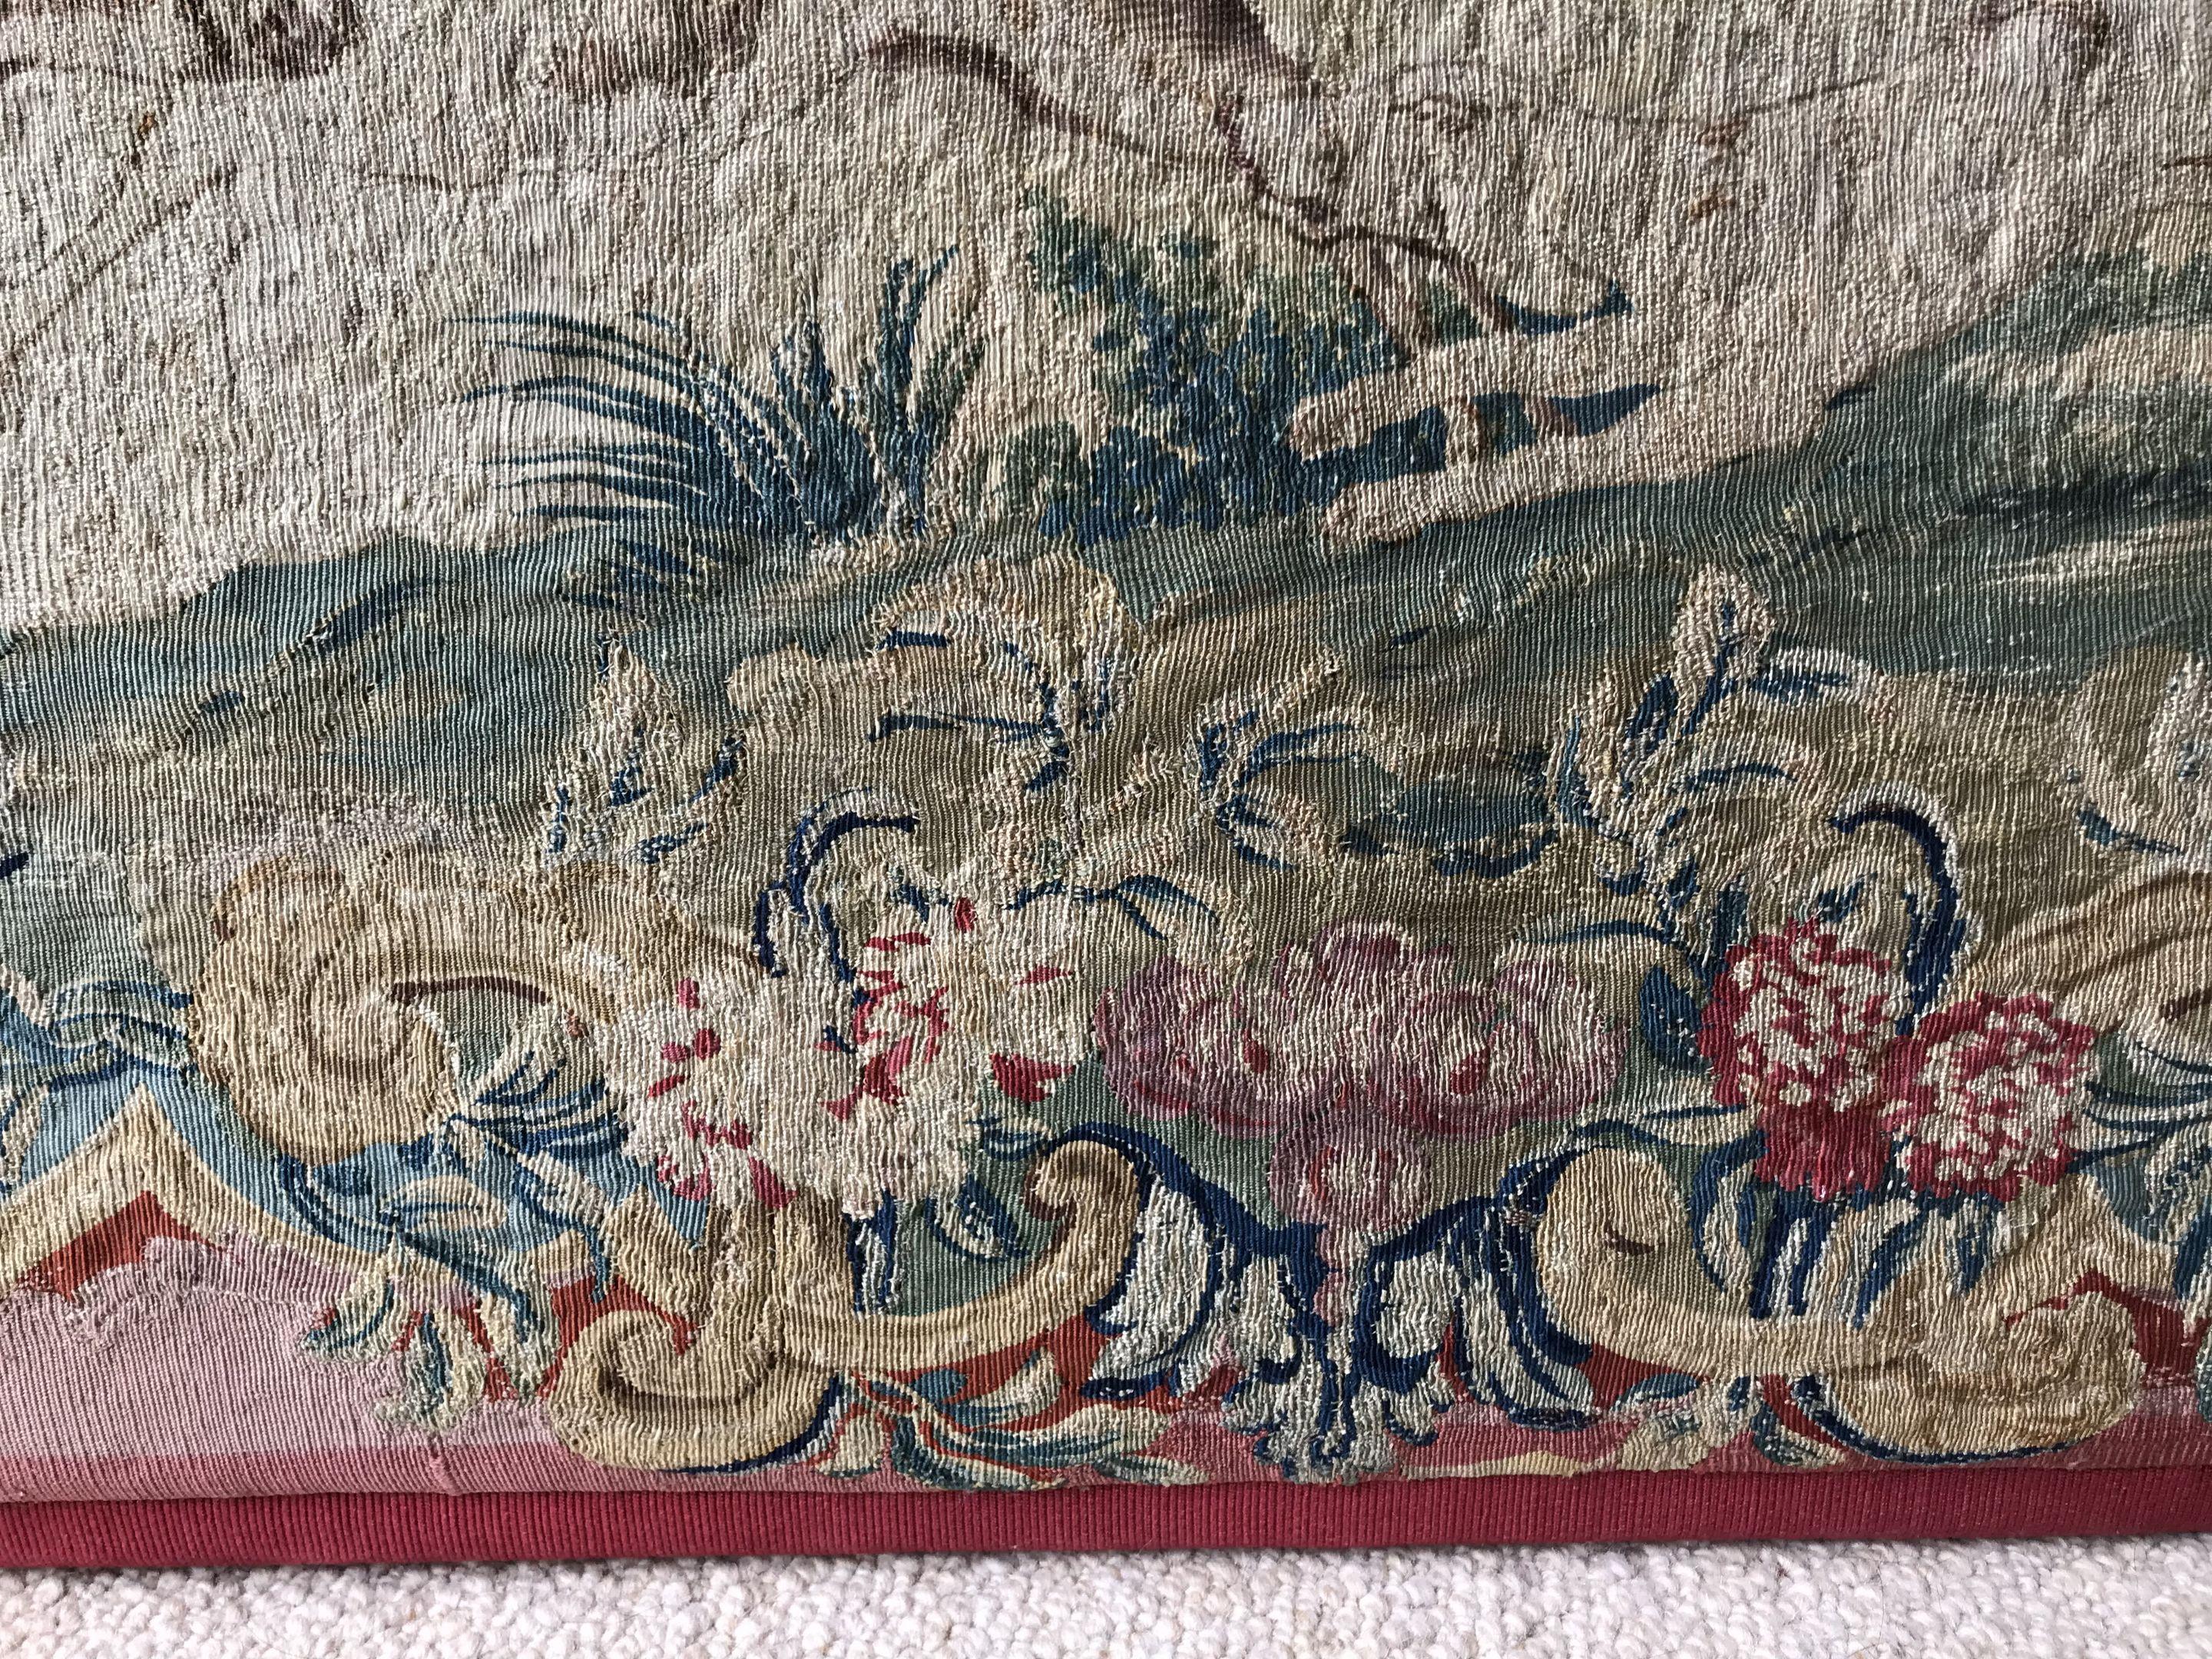 Tapestry Panel, Late 18th Century, French Louis XVI, Aubusson 9